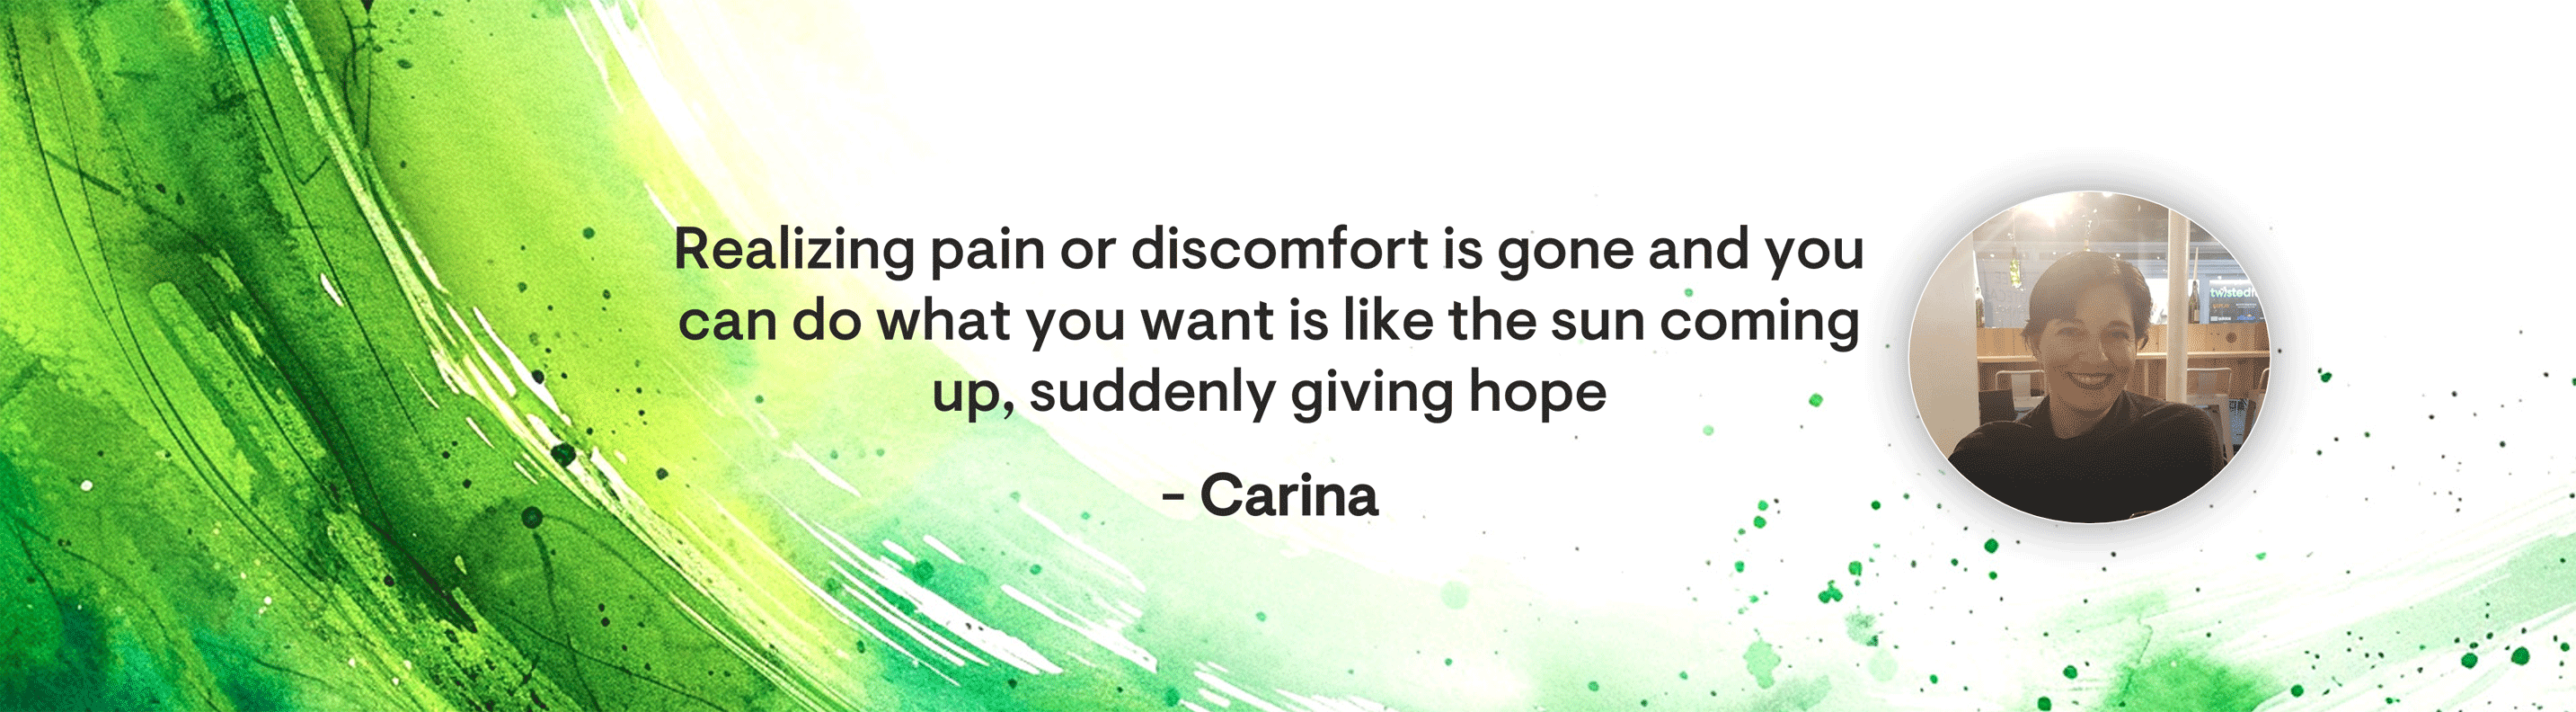 Carina’s story: confronted with cancer pain